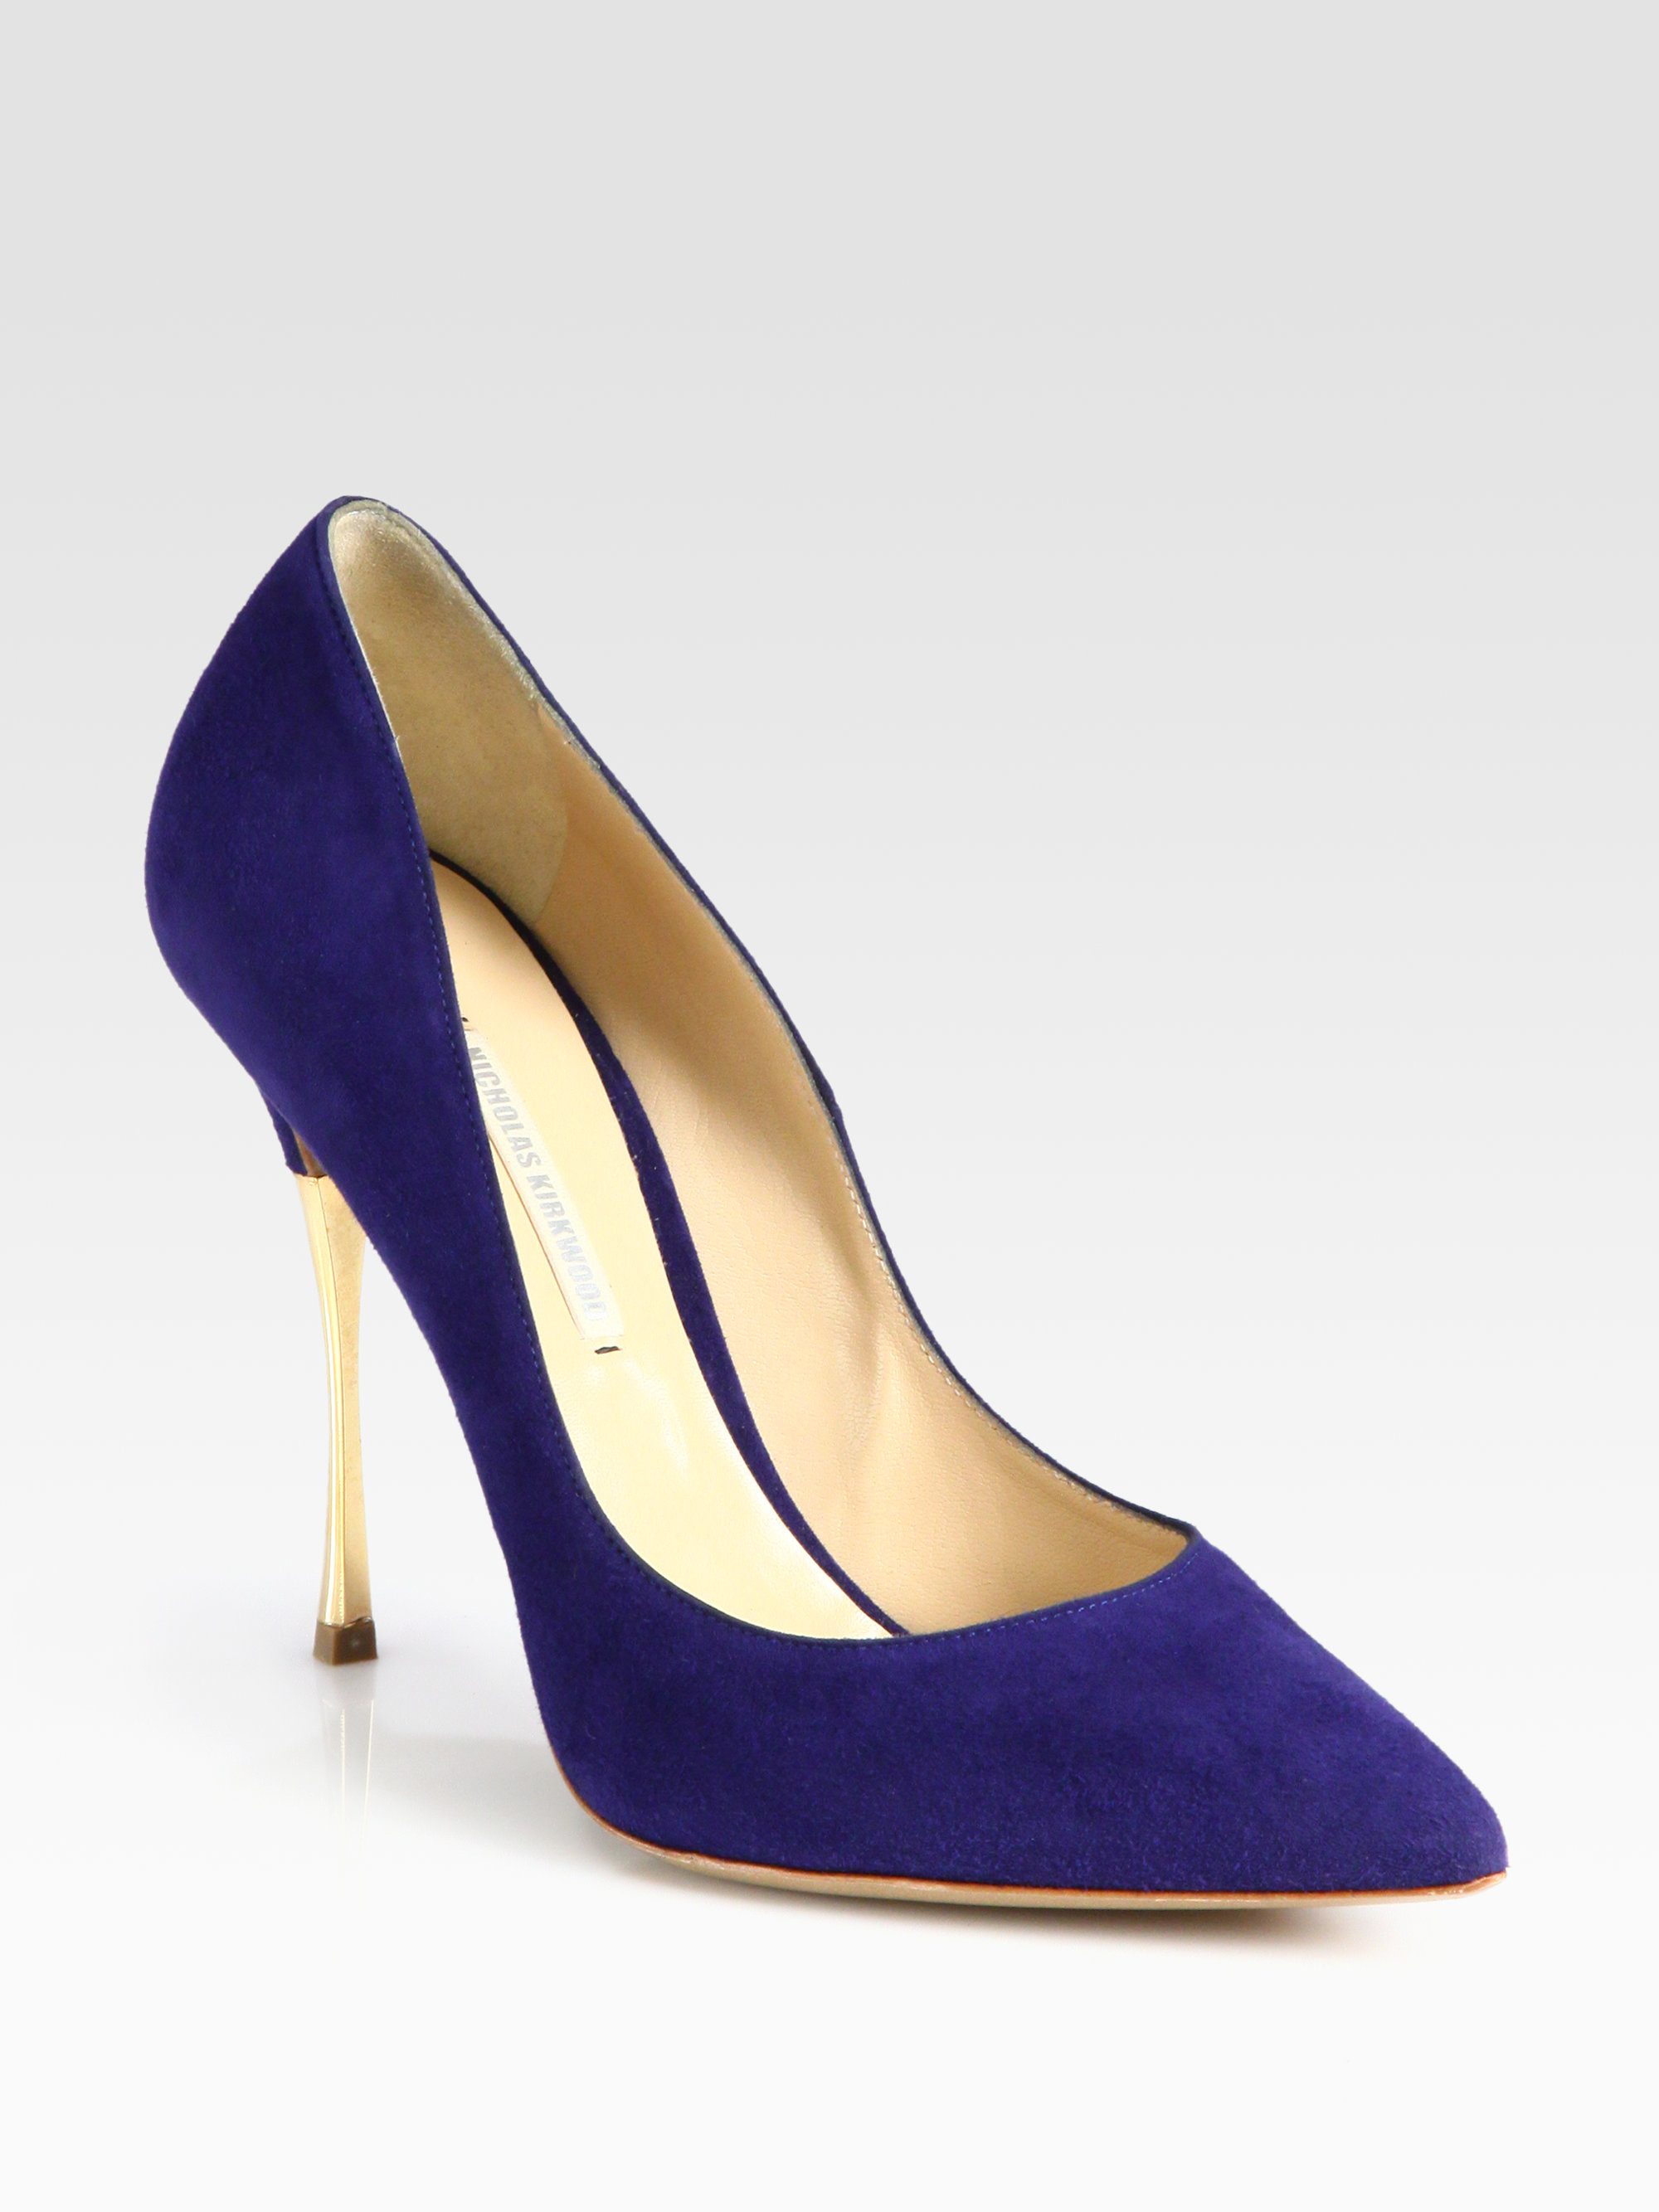 blue and gold pumps